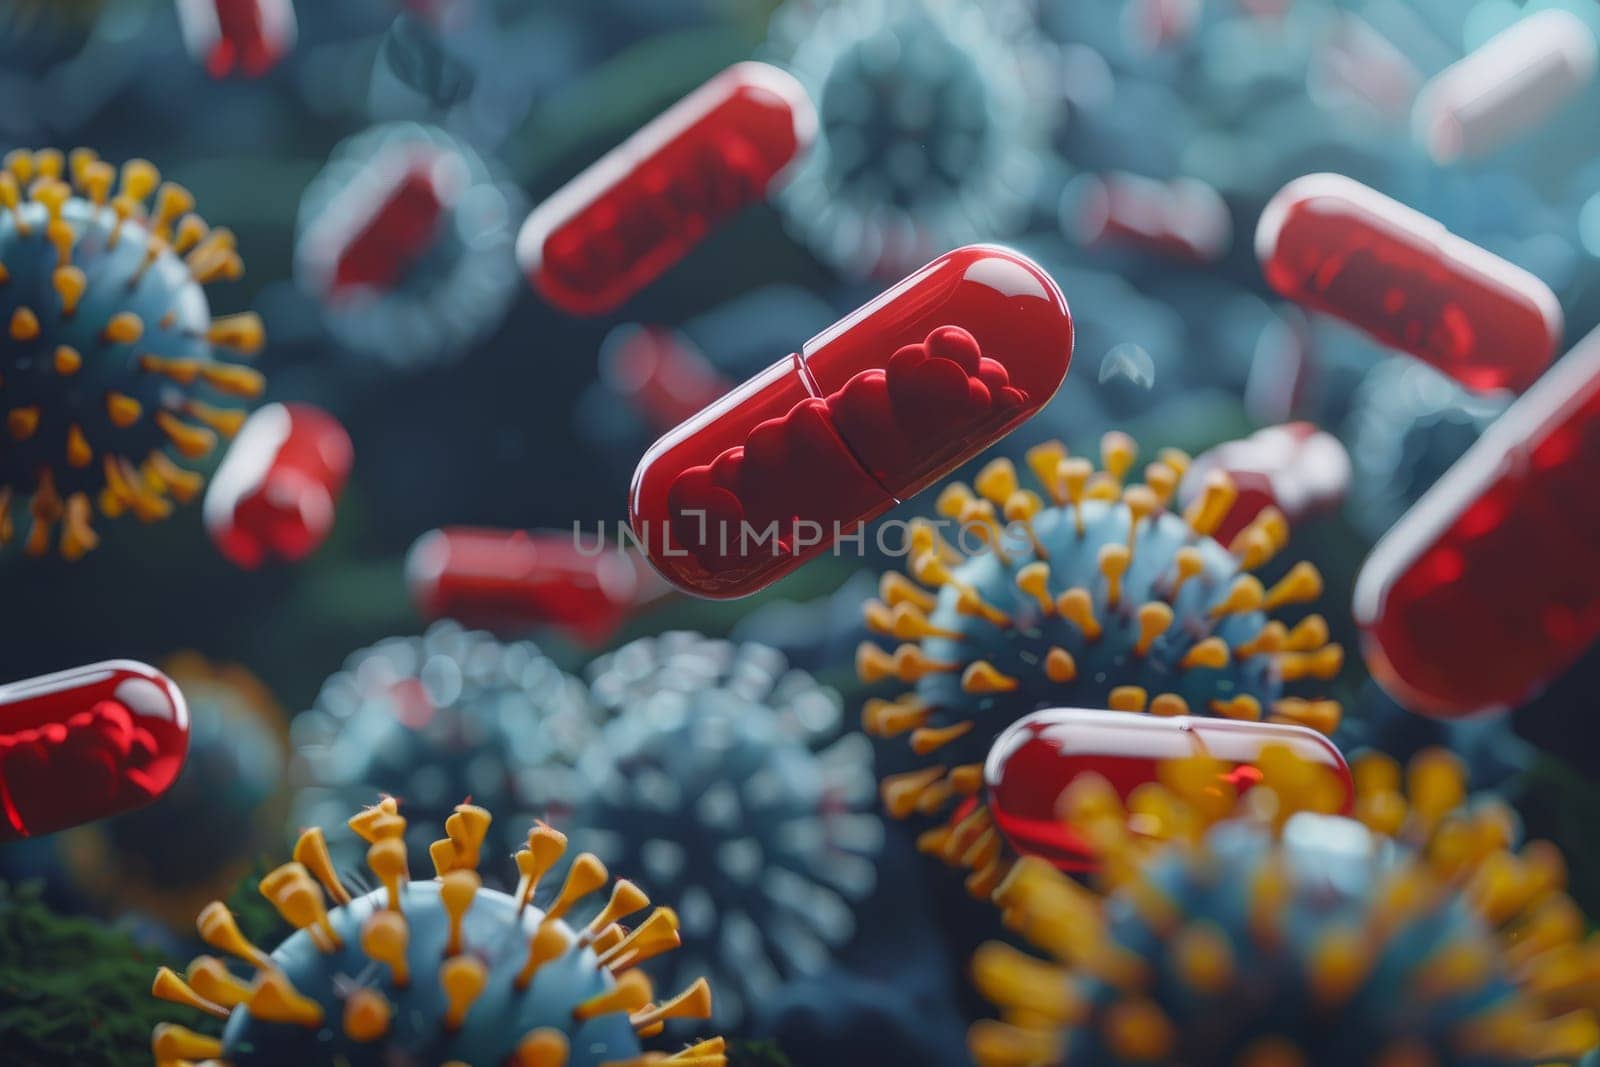 Microscopic view of viruses and bacteria cells, red capsules representing viruses and yellow spiky spheres depicting pathogens or microorganisms in abstract scientific concept